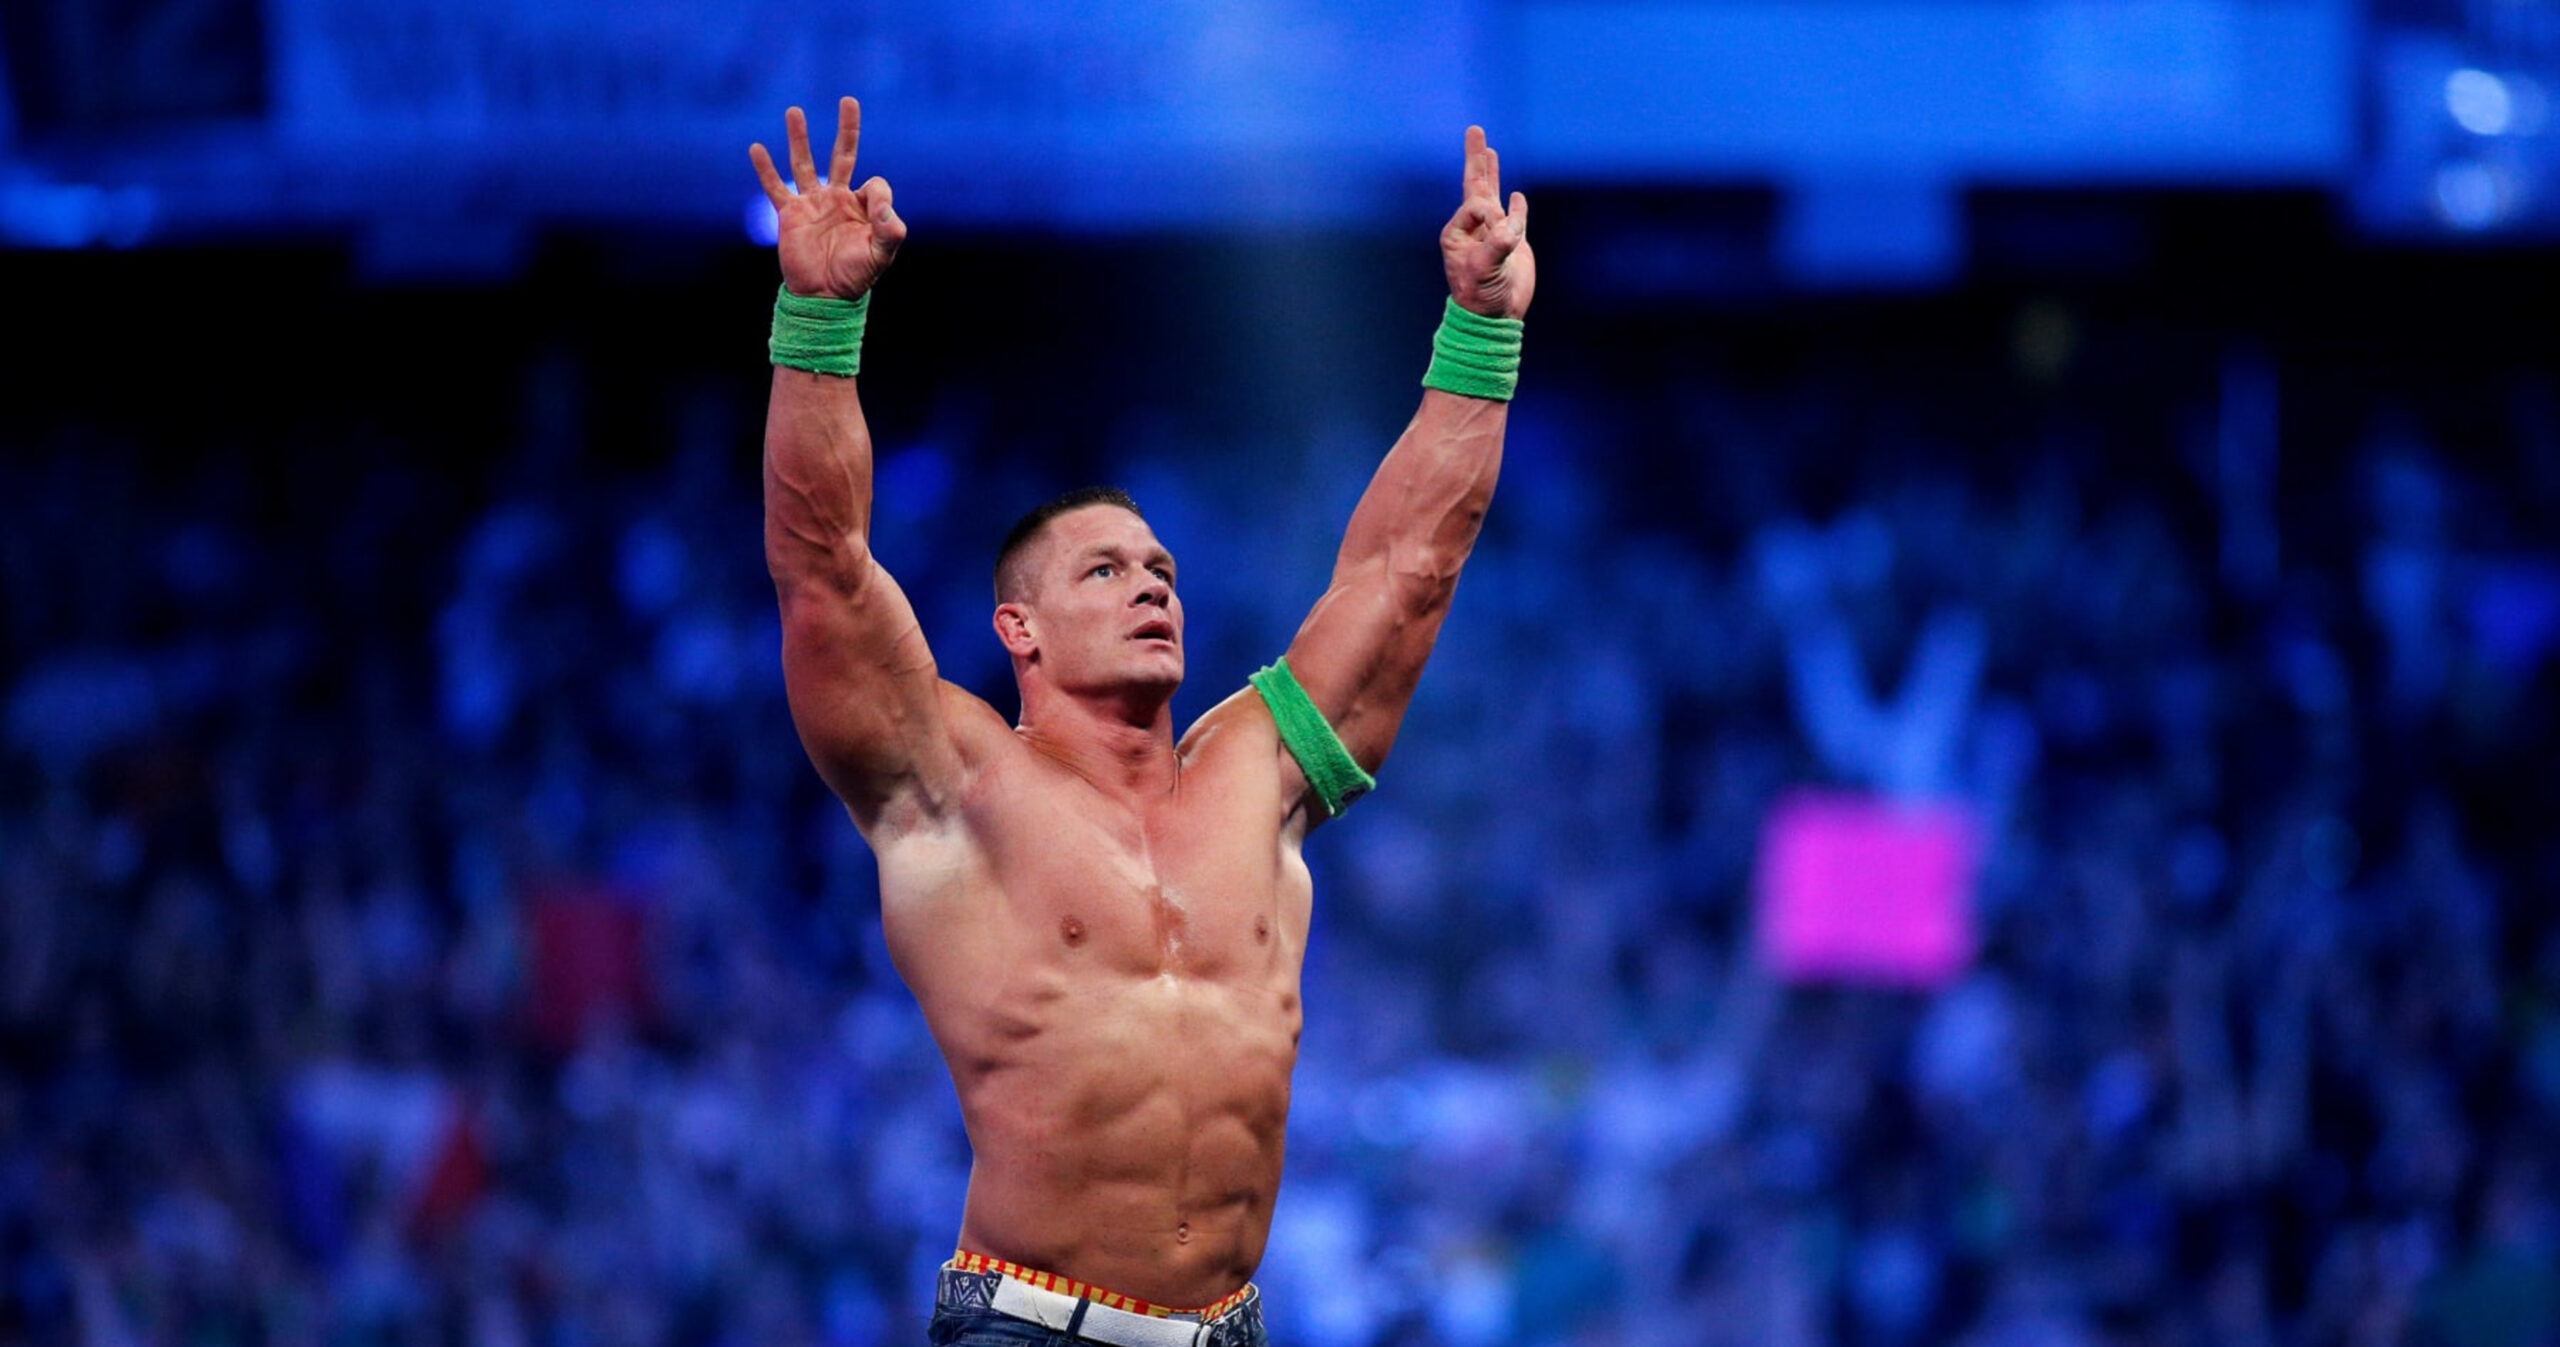 John Cena's Curtain Call: Passing the Torch to WWE's Next Generation